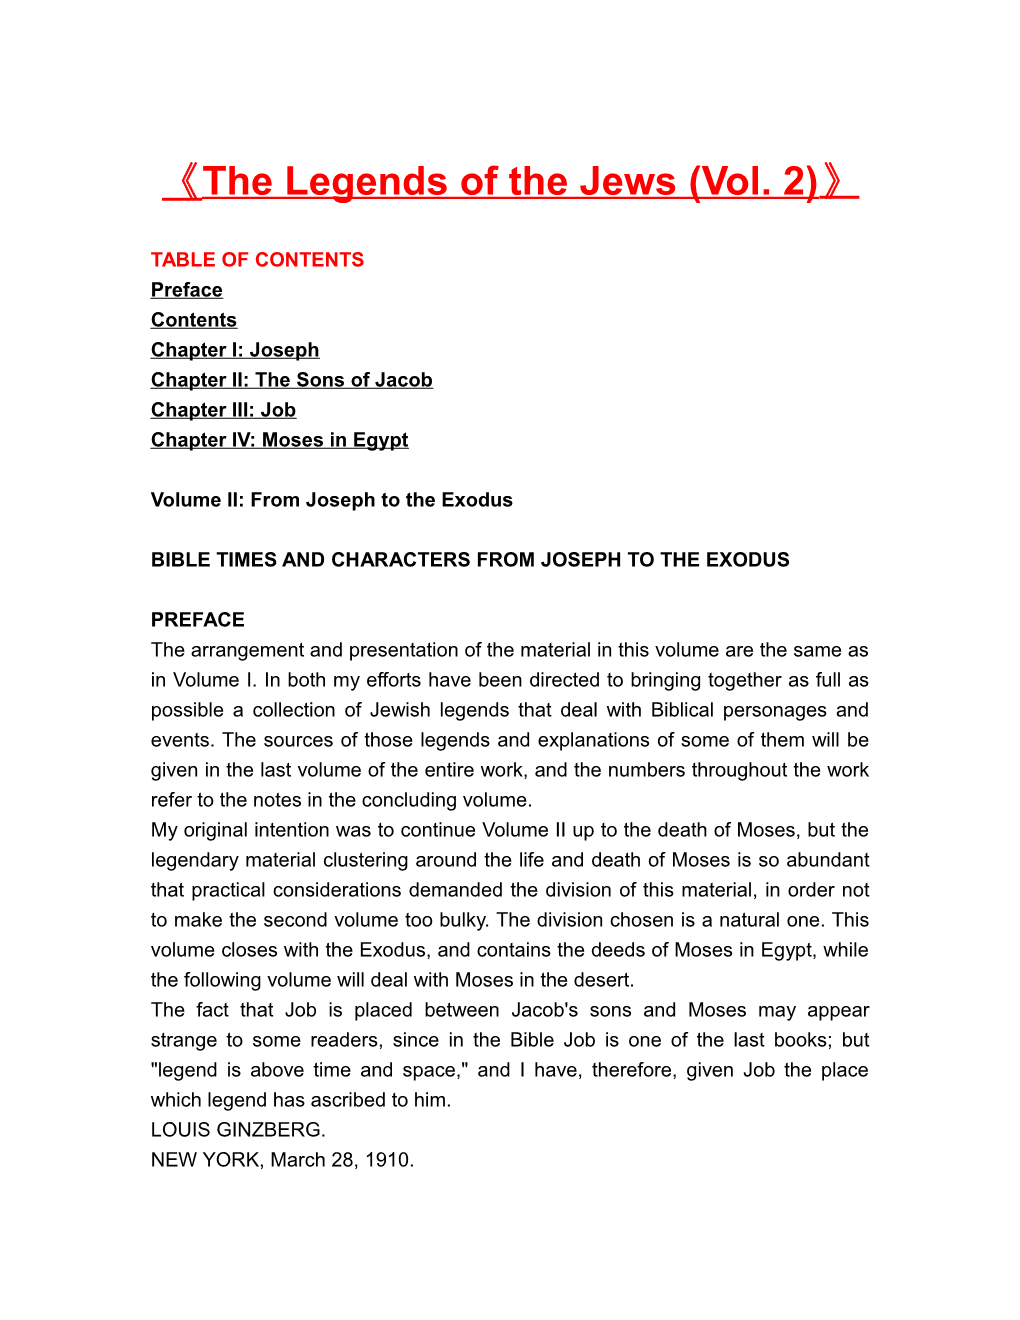 The Legends of the Jews (Vol. 2)